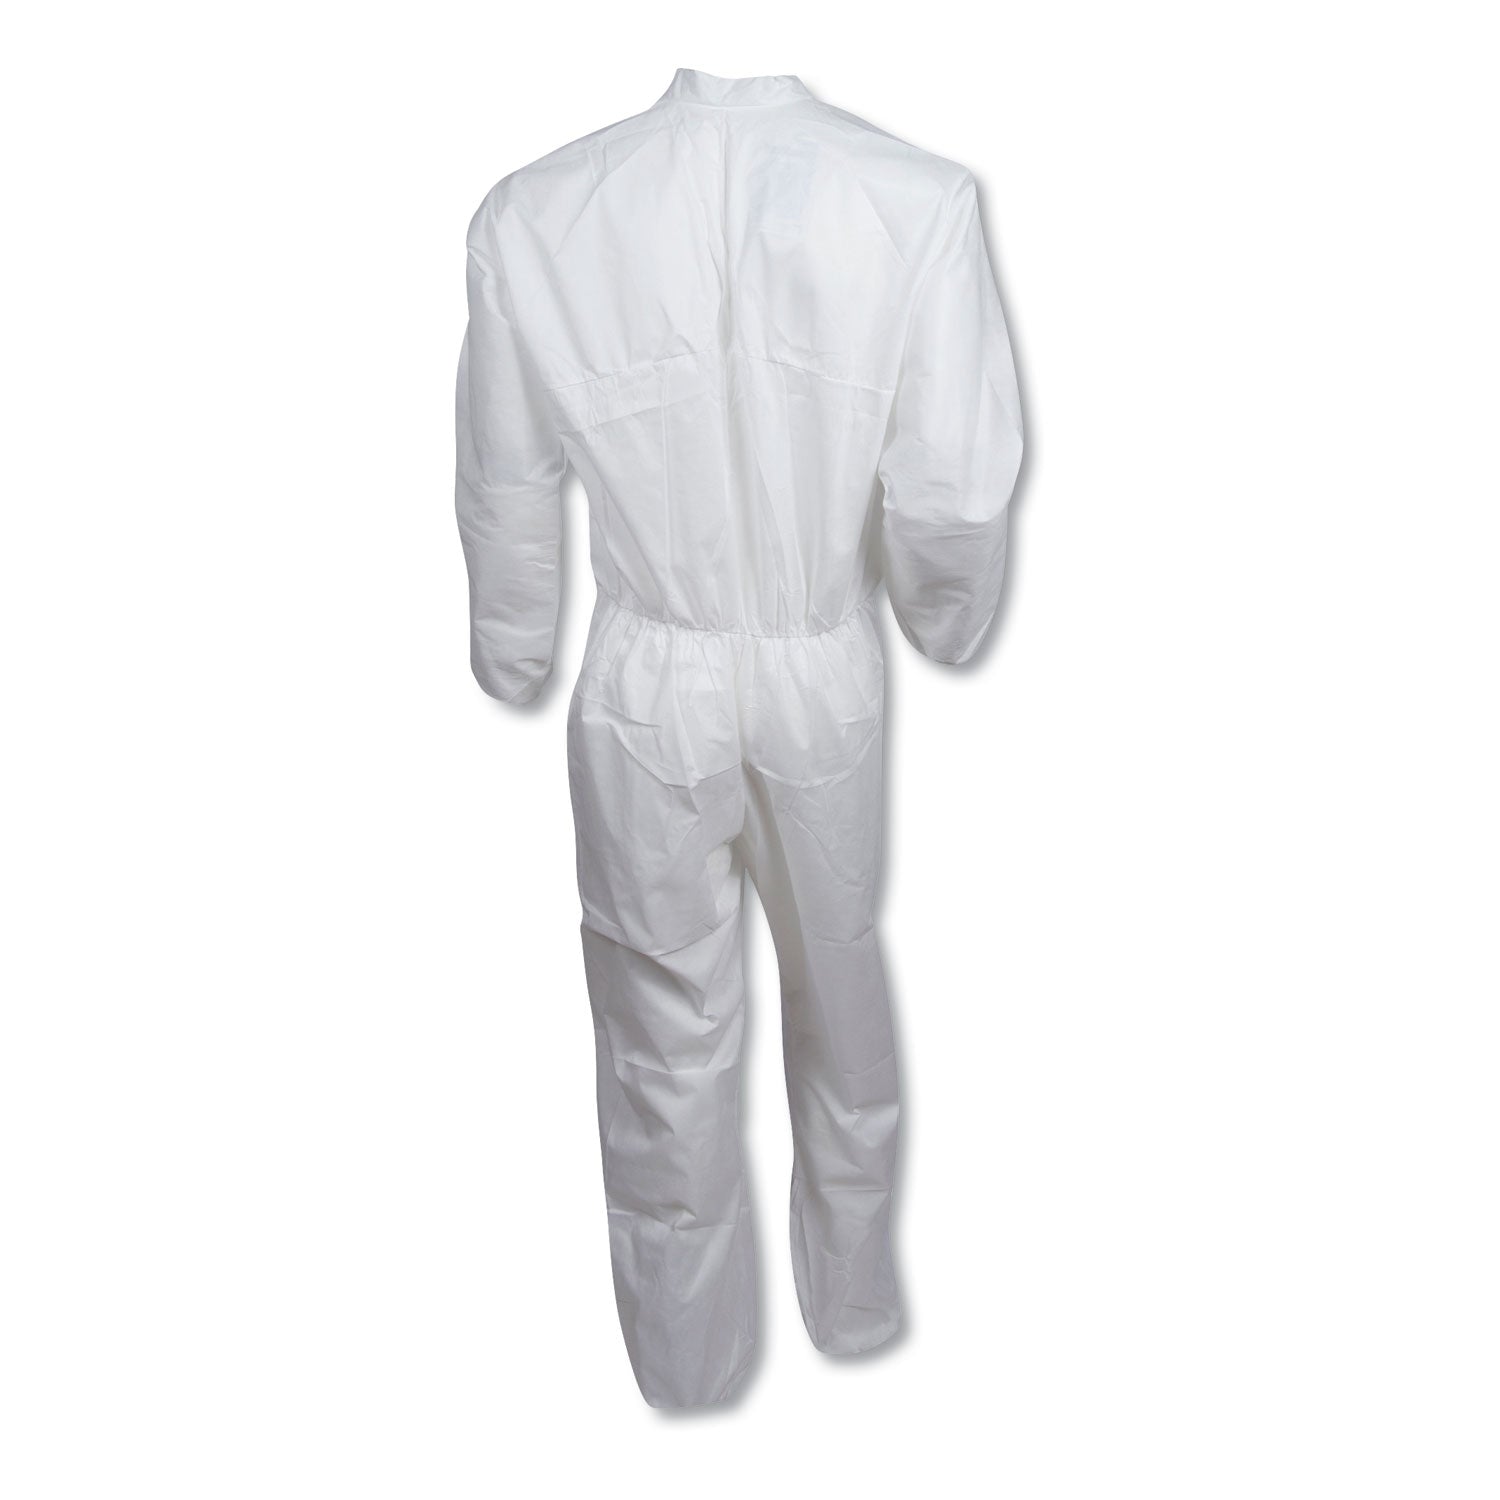 a30-elastic-back-and-cuff-coveralls-x-large-white-25-carton_kcc46104 - 6